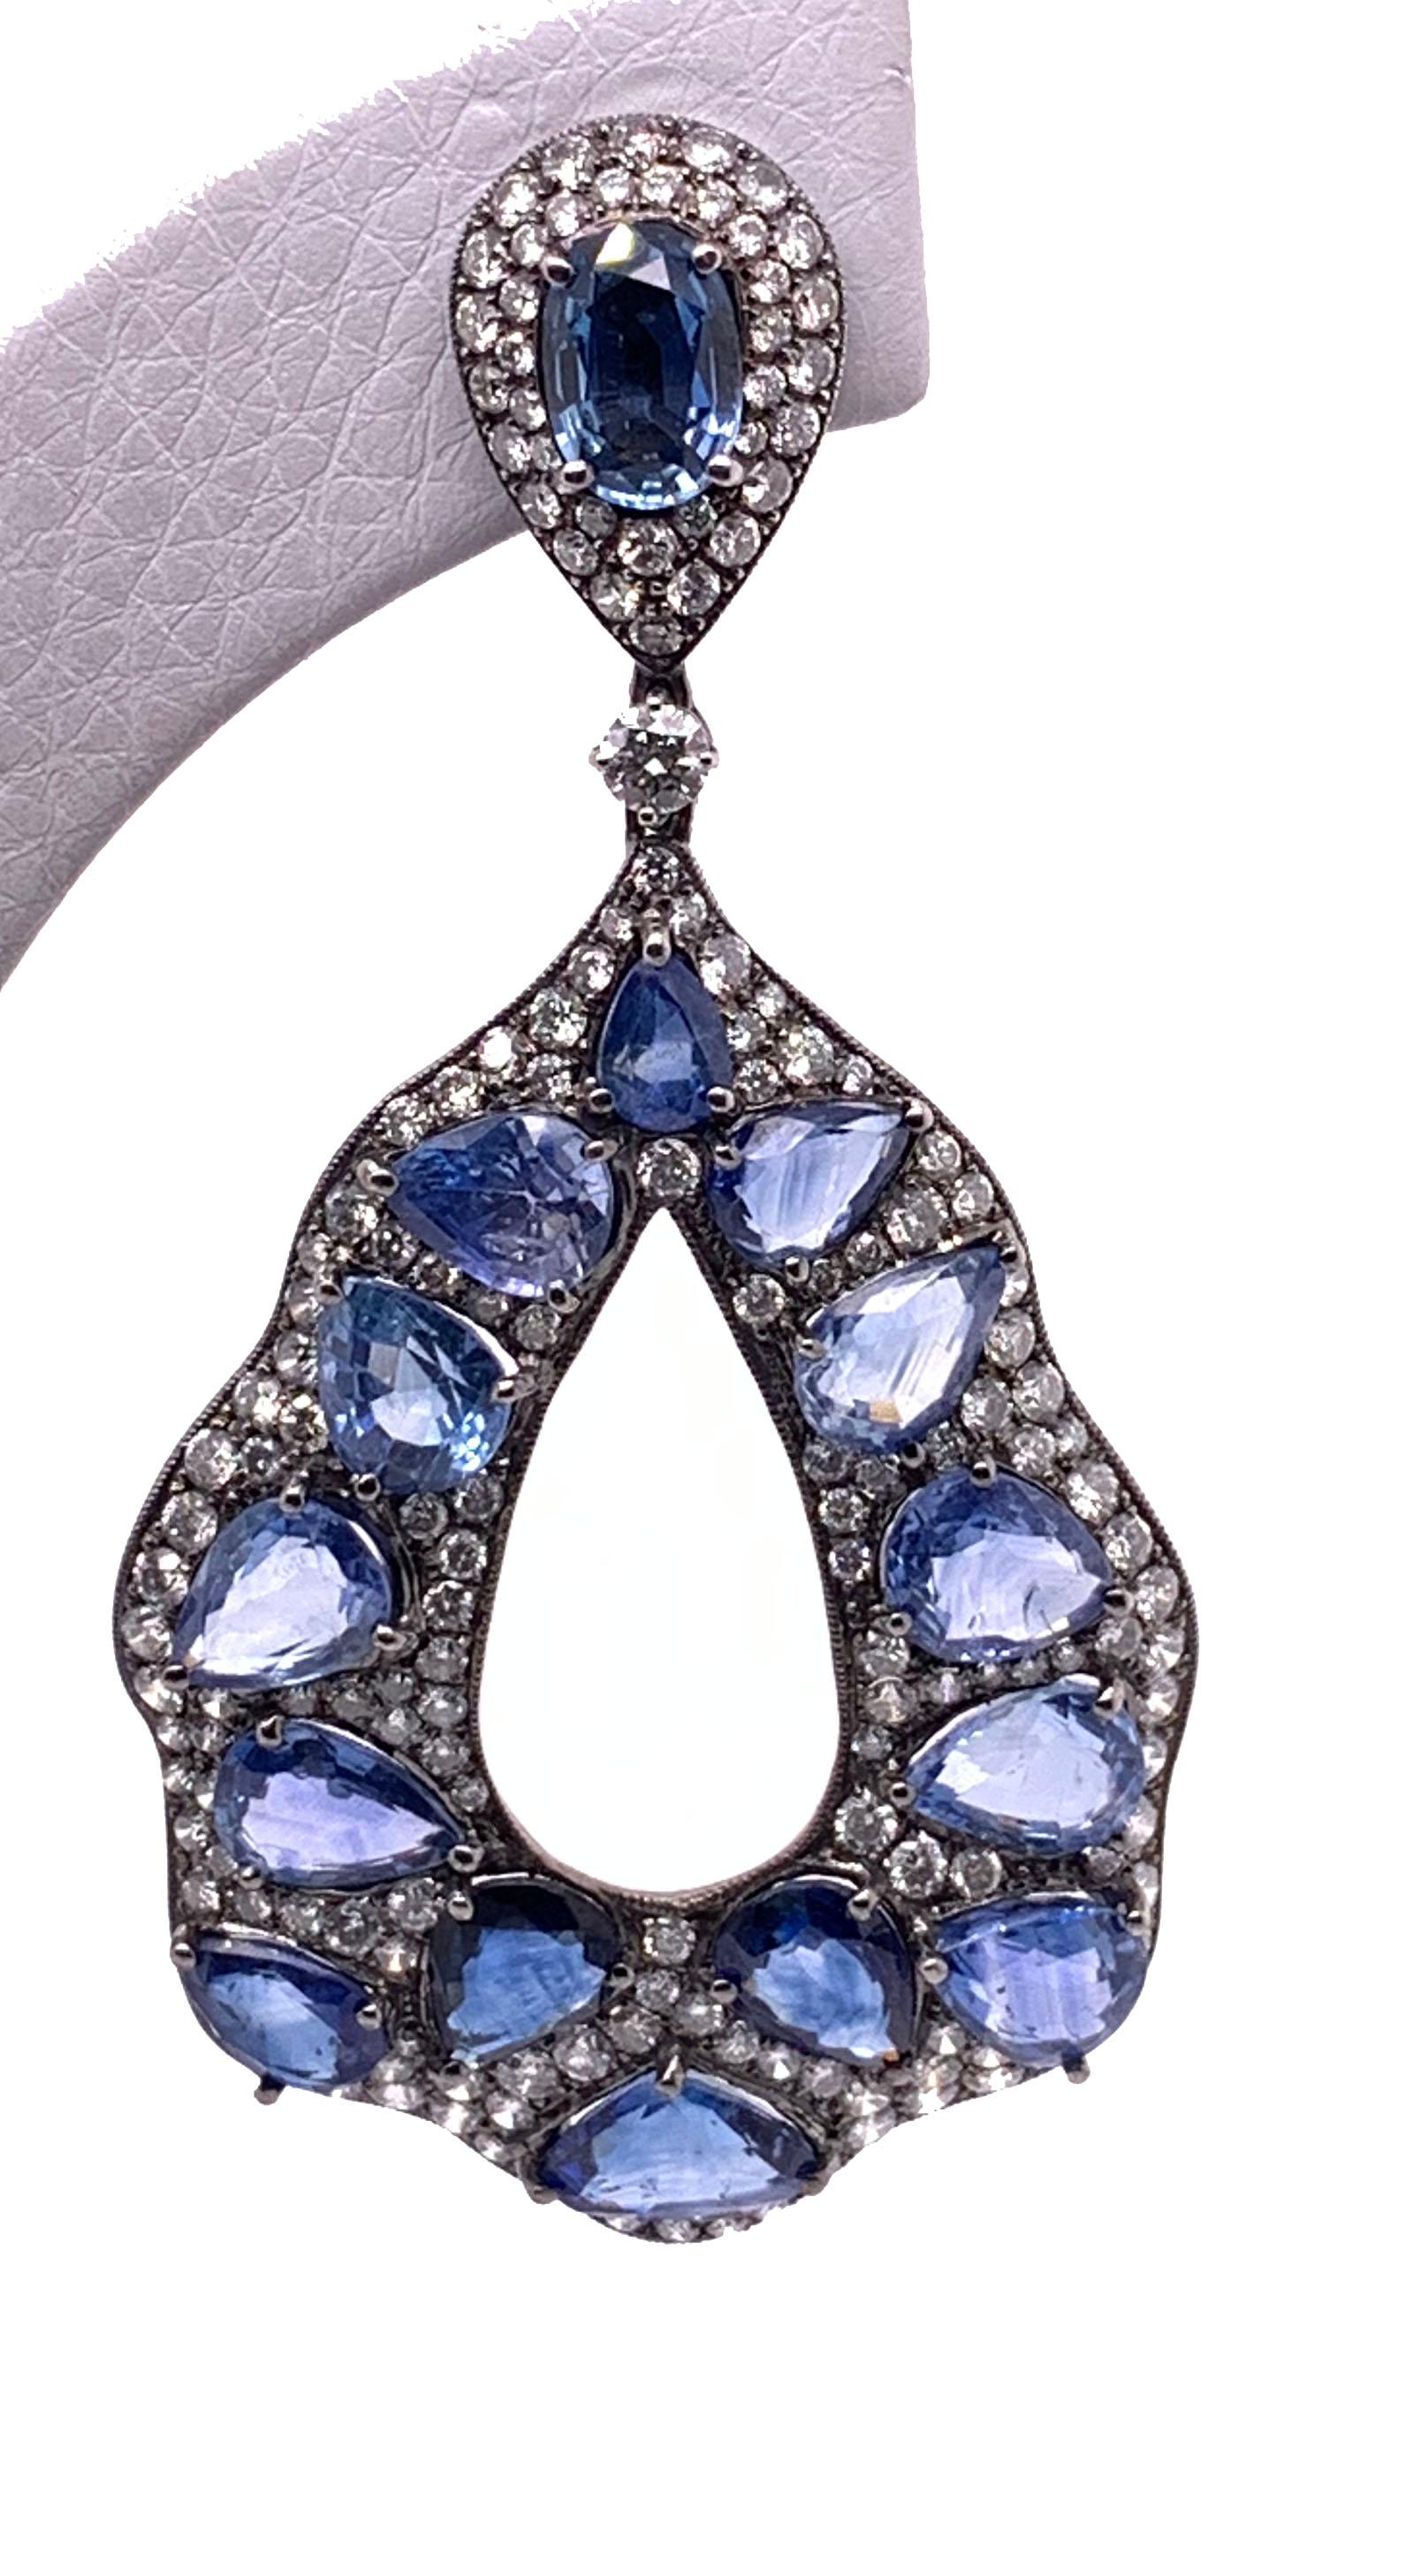 Sophia D, 39.38 Carat Sapphire Earring set in Oxidized White Gold In New Condition For Sale In New York, NY